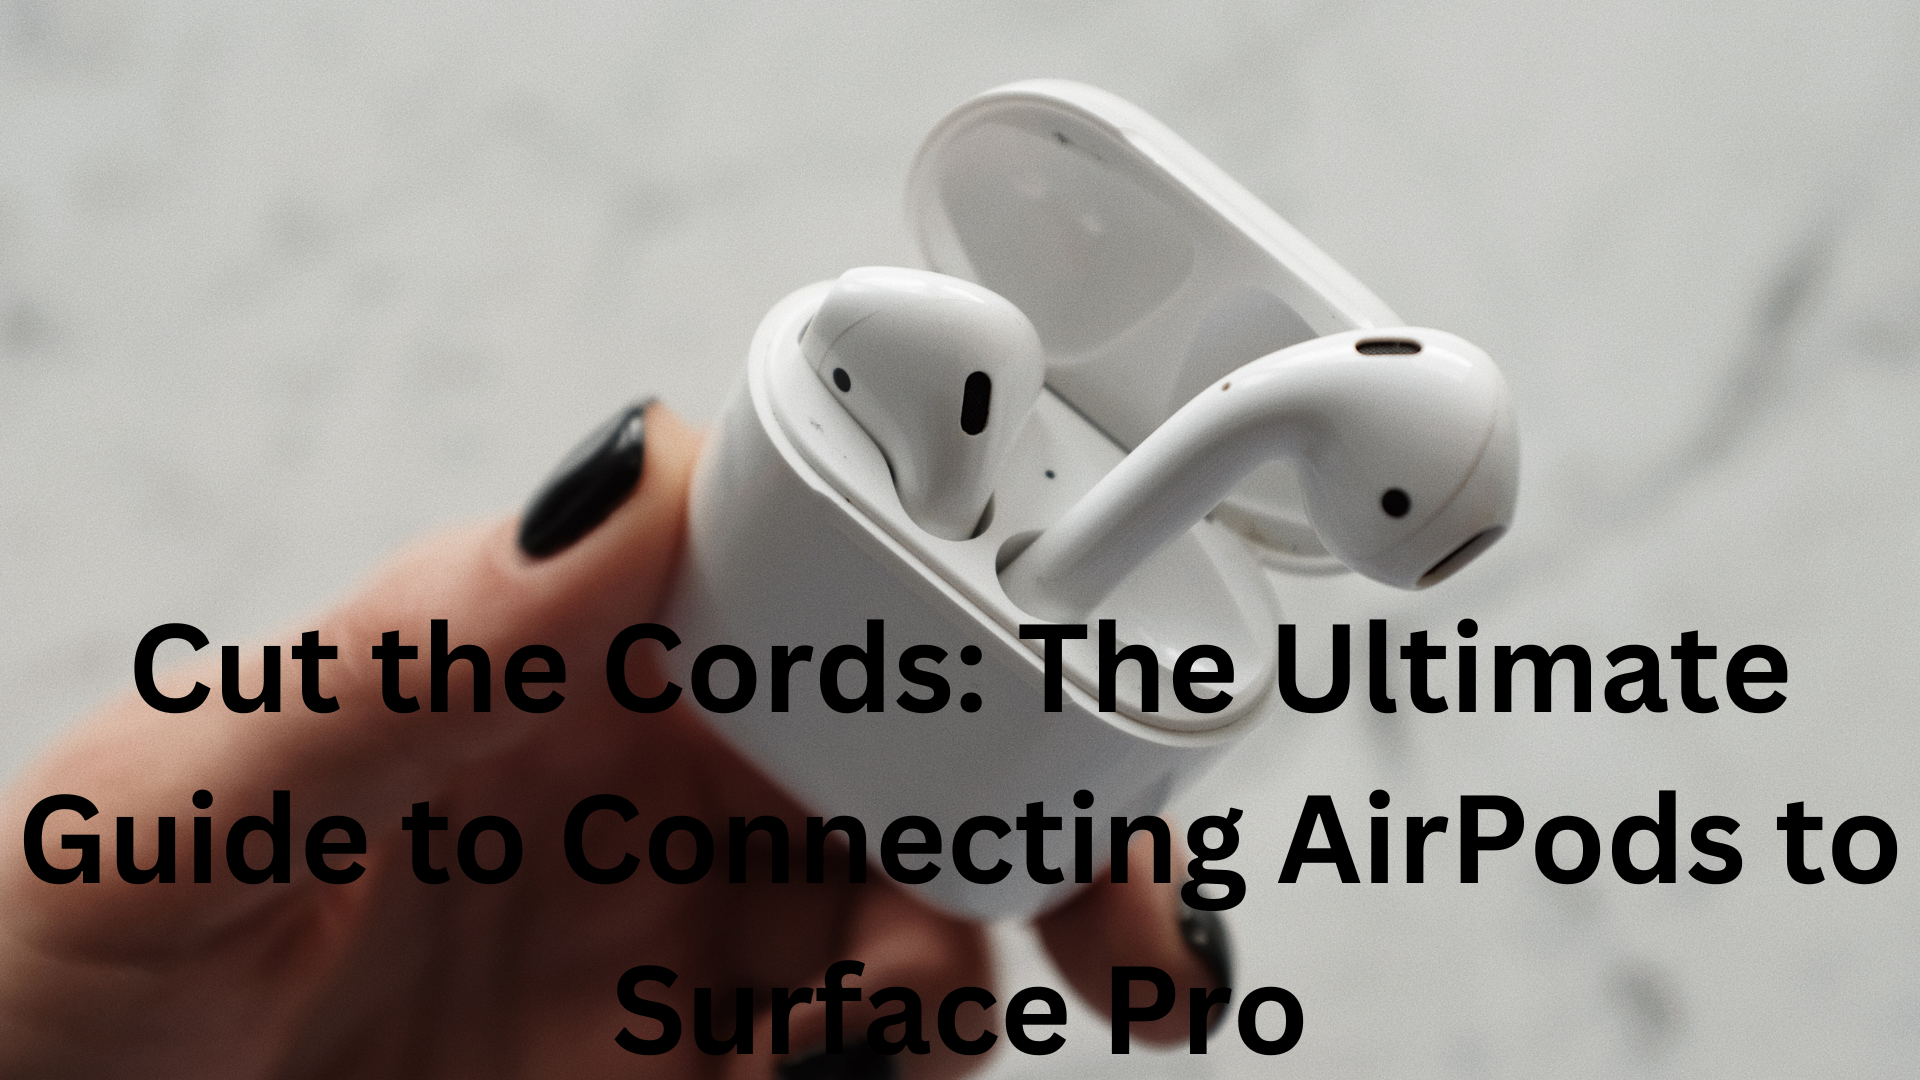 Cut the Cords The Ultimate Guide to Connecting AirPods to Surface Pro